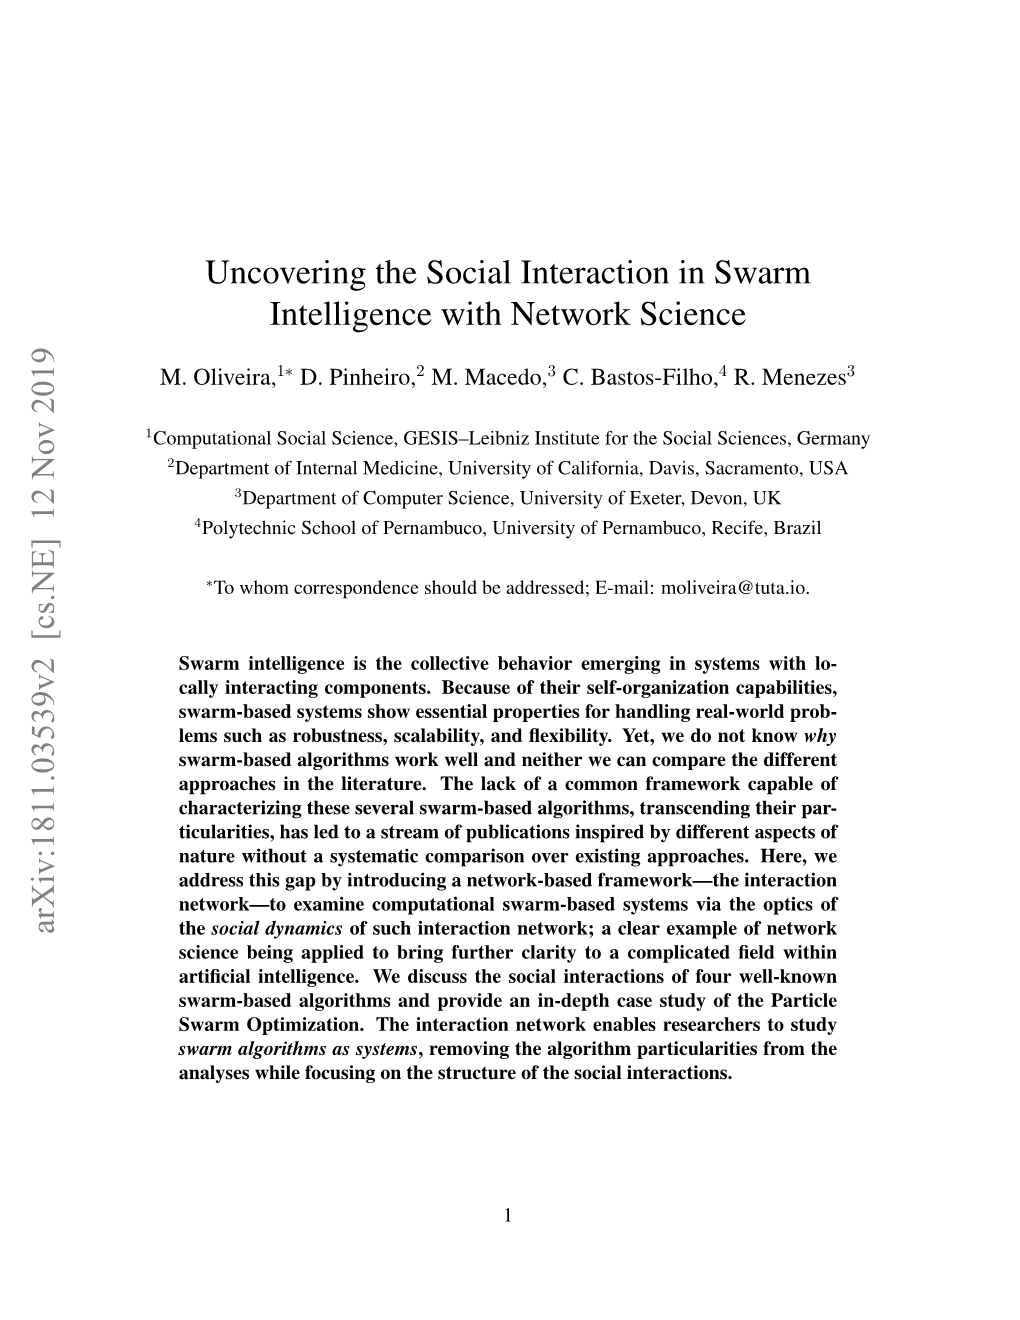 Uncovering the Social Interaction in Swarm Intelligence with Network Science